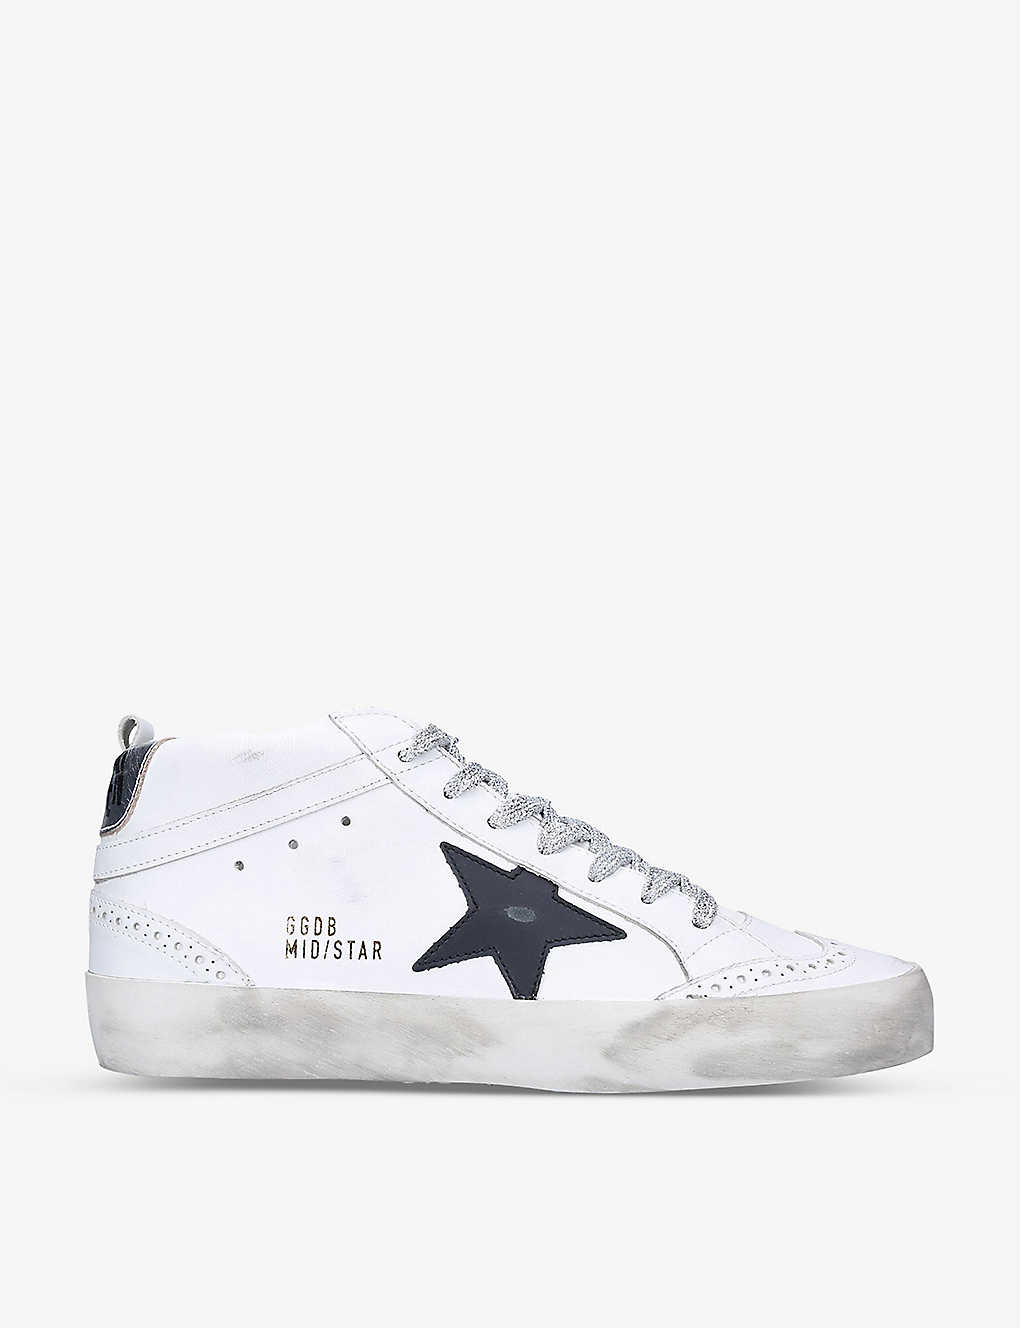 Golden Goose Women's Mid Star 10238 Leather Trainers In White/oth